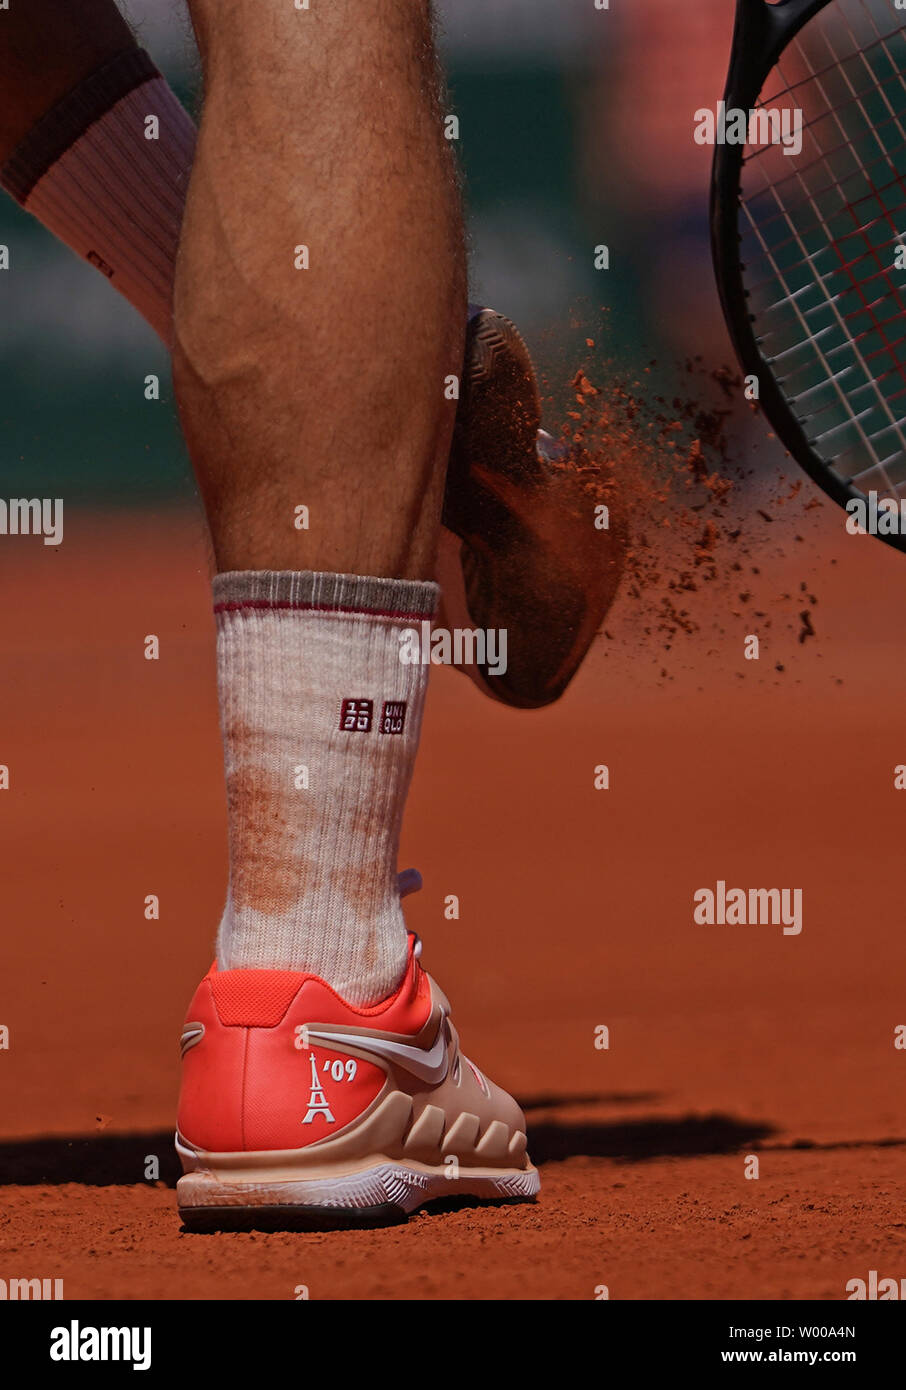 Roger Federer of Switzerland clears clay from his shoes during his French  Open men's fourth round match against Leonardo Mayer of Argentina at Roland  Garros in Paris on June 2, 2019. Federer